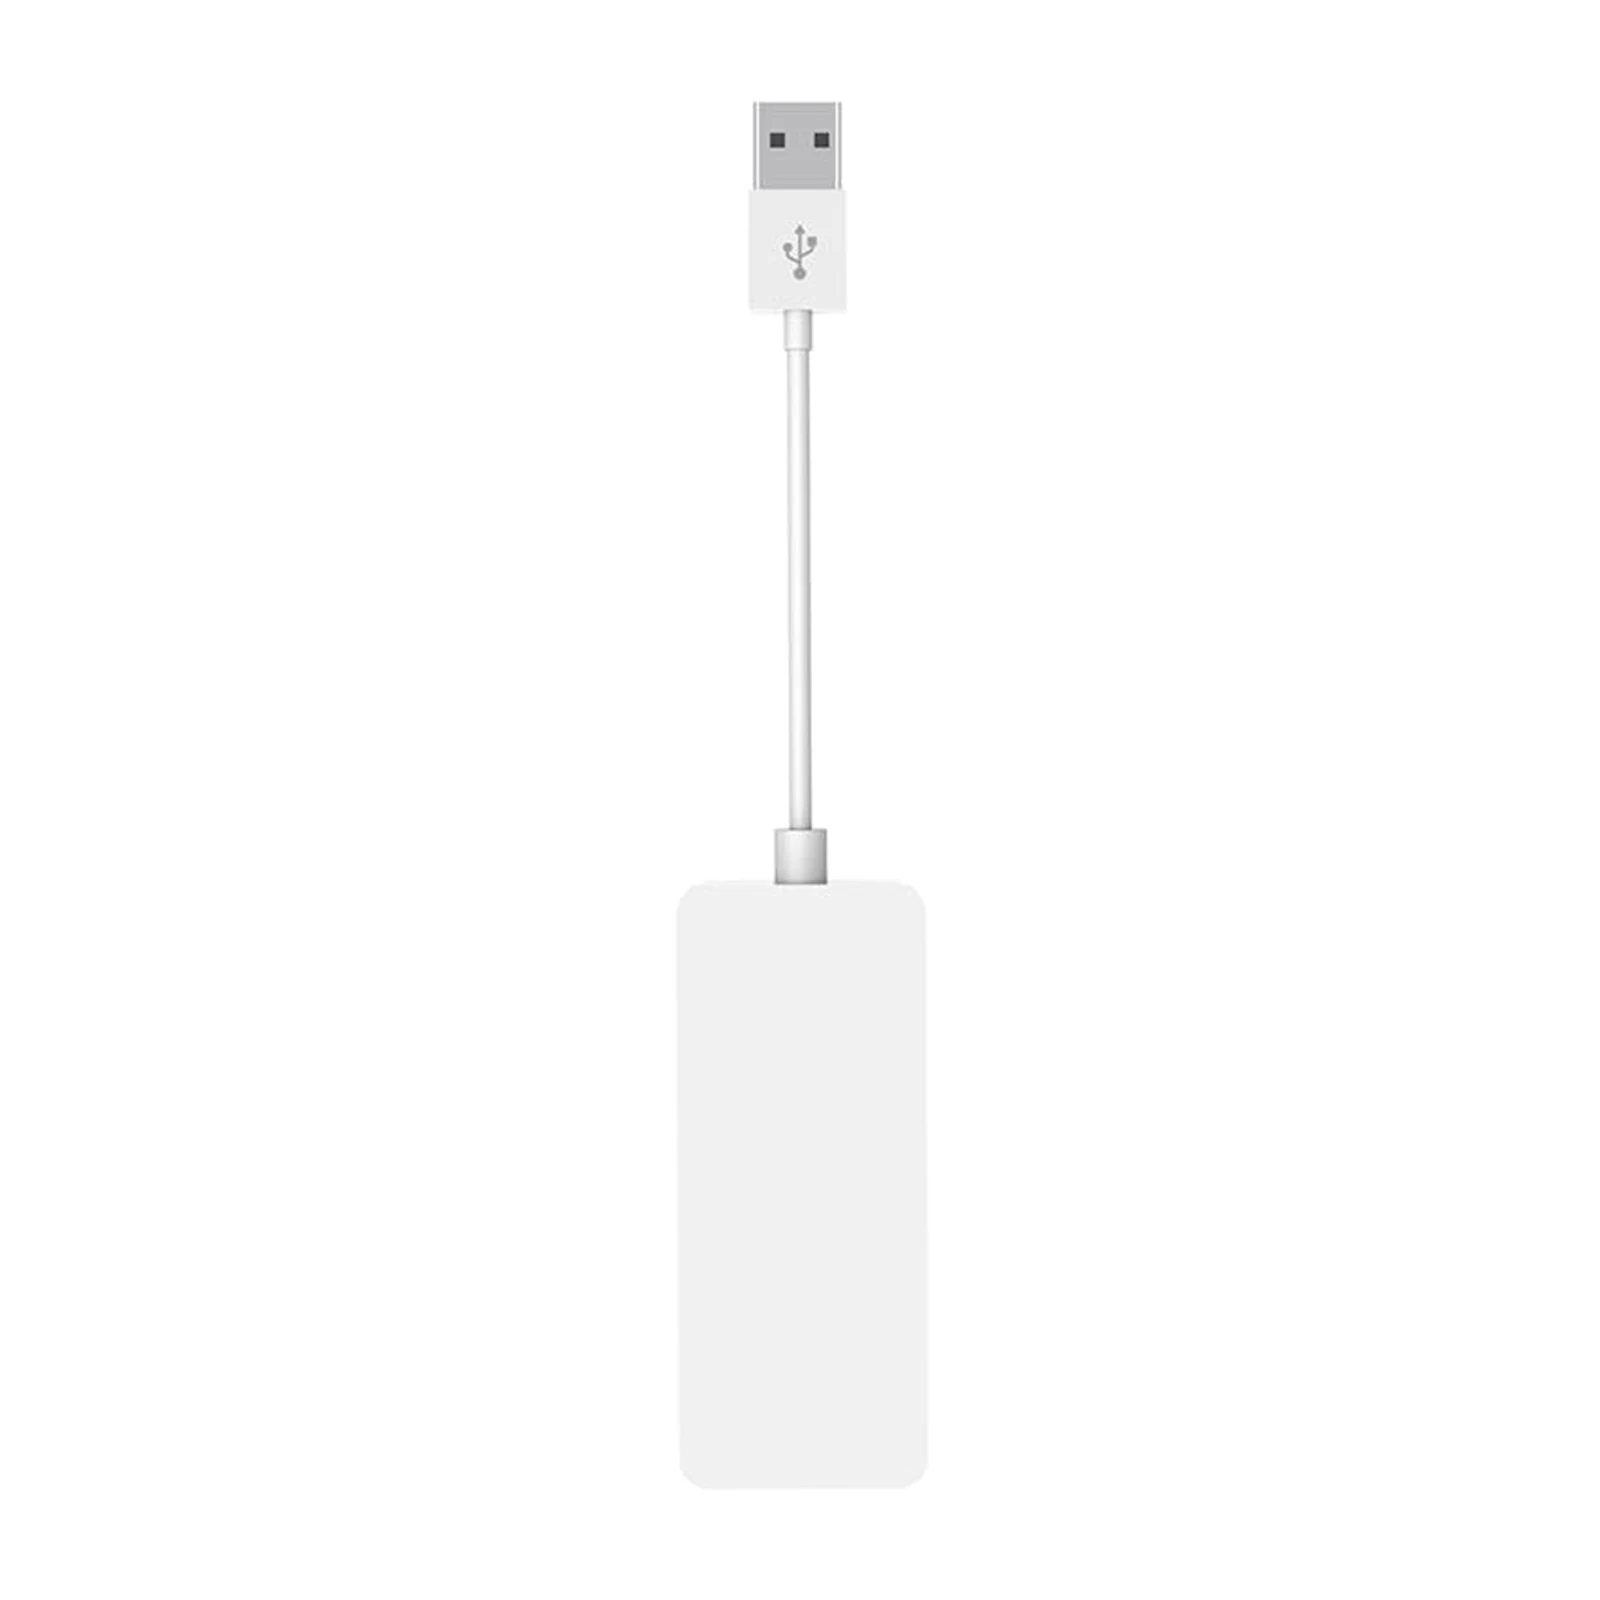 Wired Smart Link  Dongle for Android Navigation Player Mini USB  Stick Auto, White